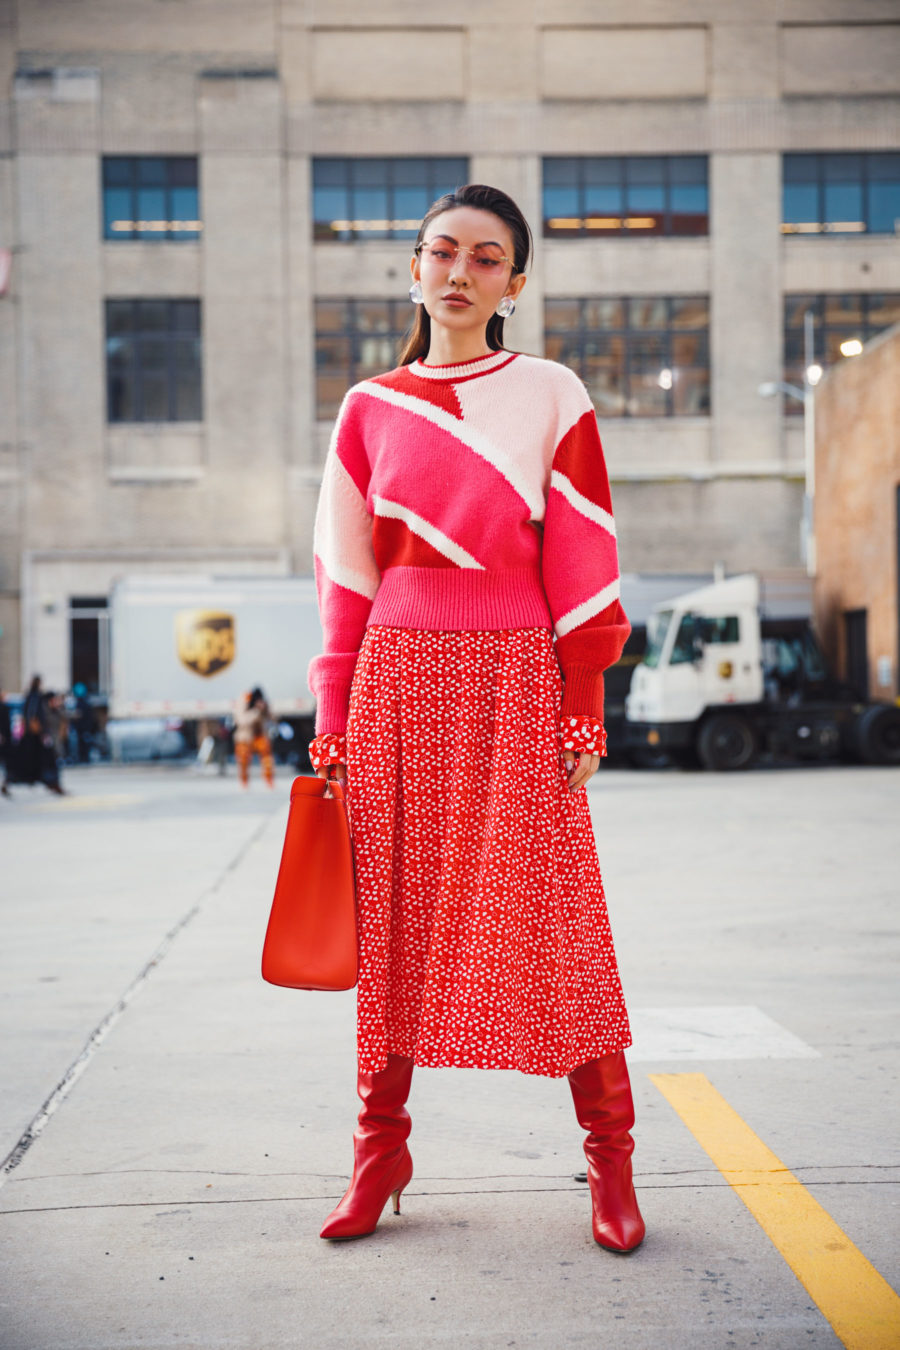 Outdated Fashion Rules You Should Break, nyc winter style, red & pink outfit // Notjessfashion.com